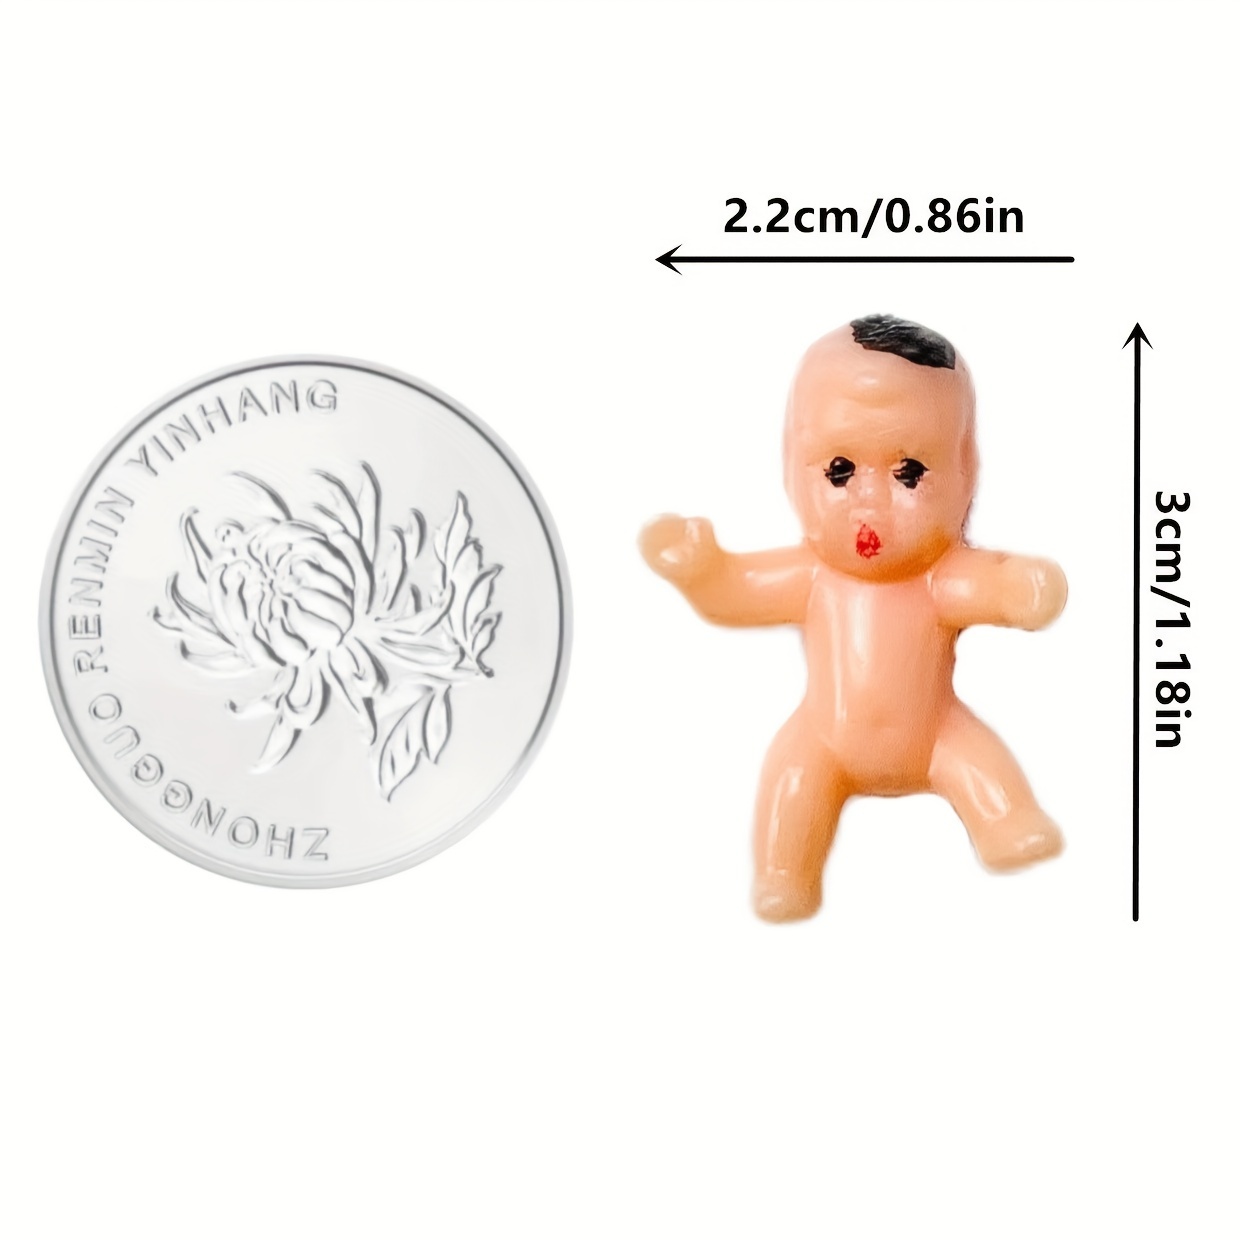 Selizo 100 Mini Plastic Babies: Assorted Colors, Tiny King Cake Figurines  for Baby Shower Games & Ice Cube Fun - Yahoo Shopping